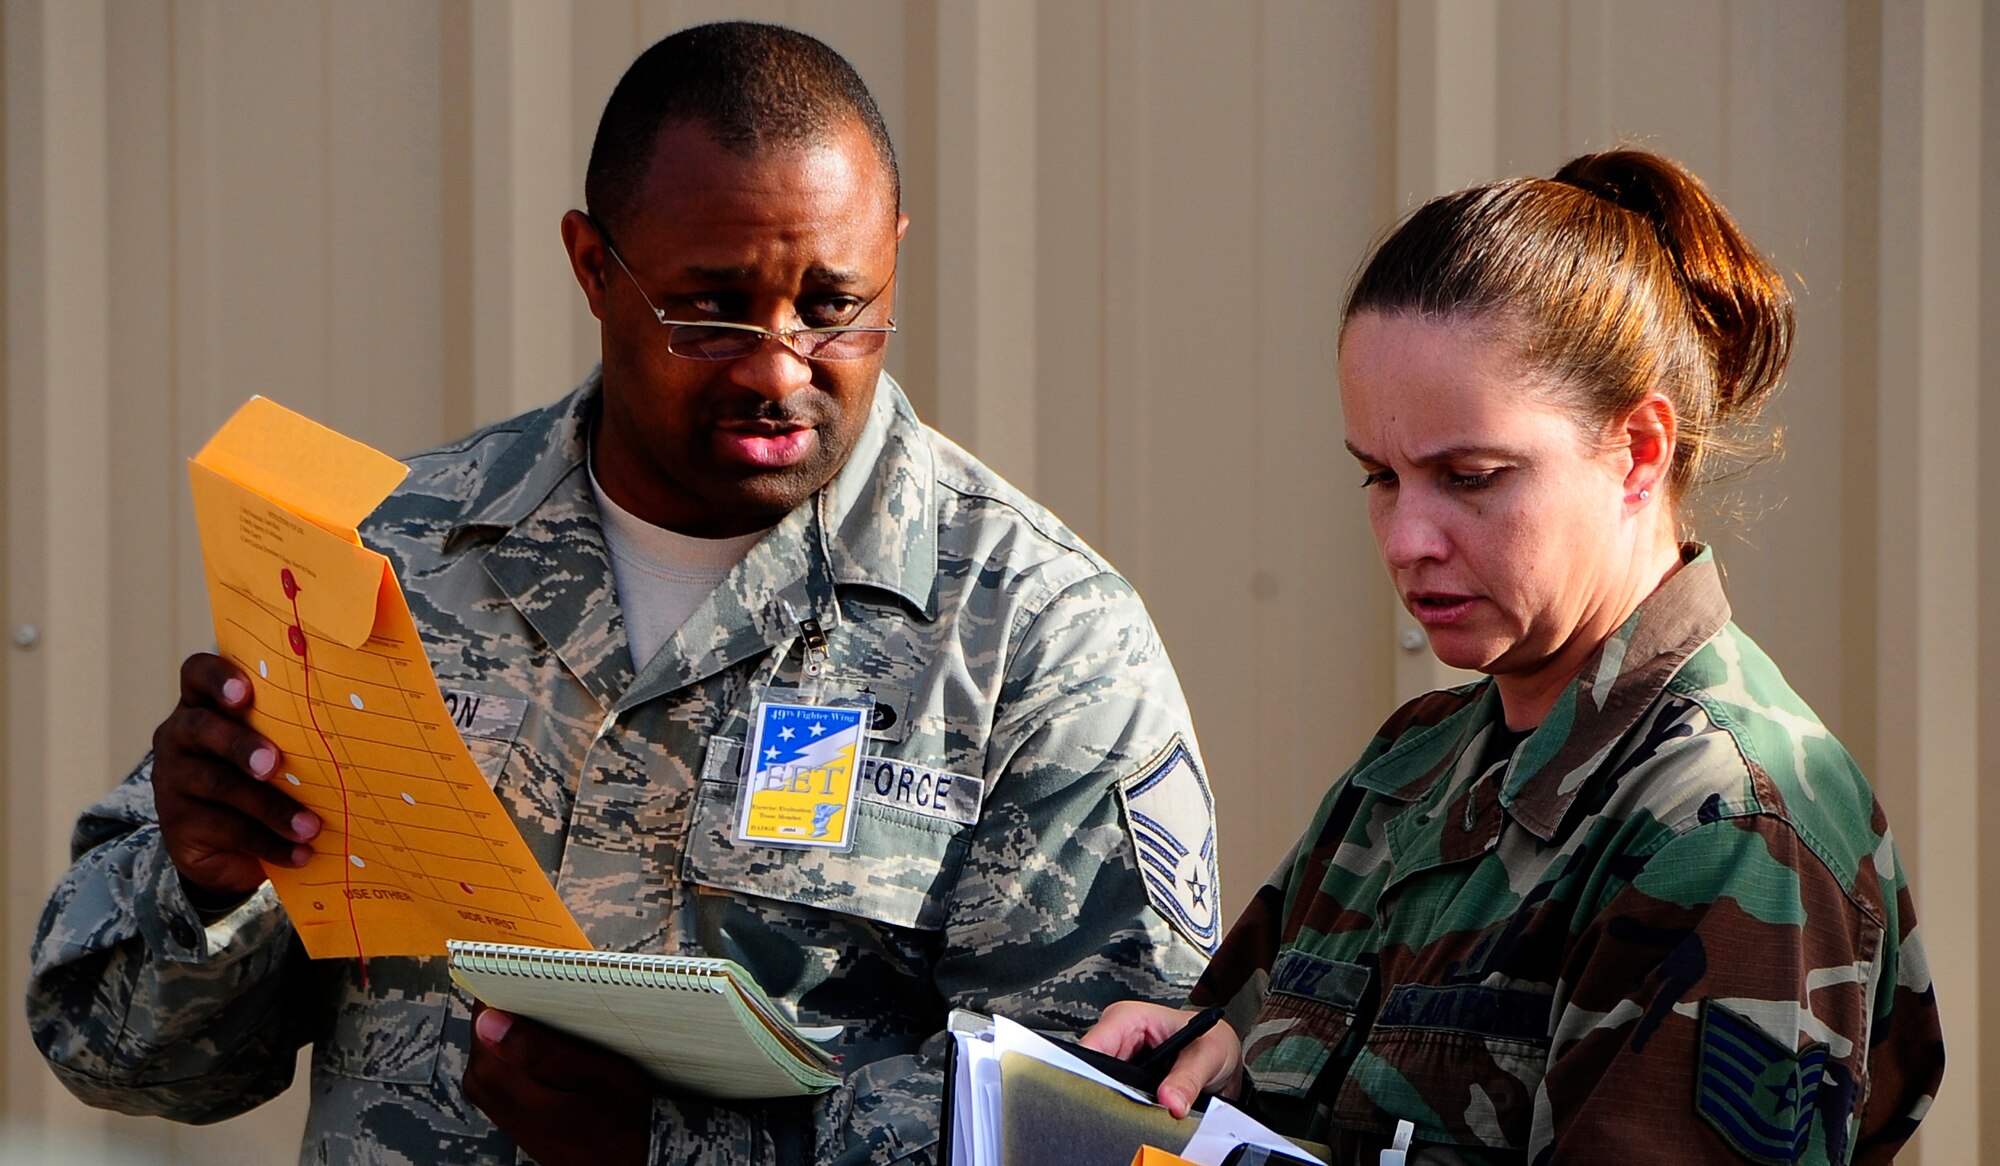 HOLLOMAN AIR FORCE BASE, N.M. -- Master Sgt. Terry Jefferson and Tech. Sgt. Loretta Lopez, from the 49th Force Support Squadron, double check processing rosters during a Phase 1 exercise here Oct. 8. The exercise scenario consisted of processing Airmen for deployment. (U.S. Air Force photo by Tech. Sgt. Chris Flahive)